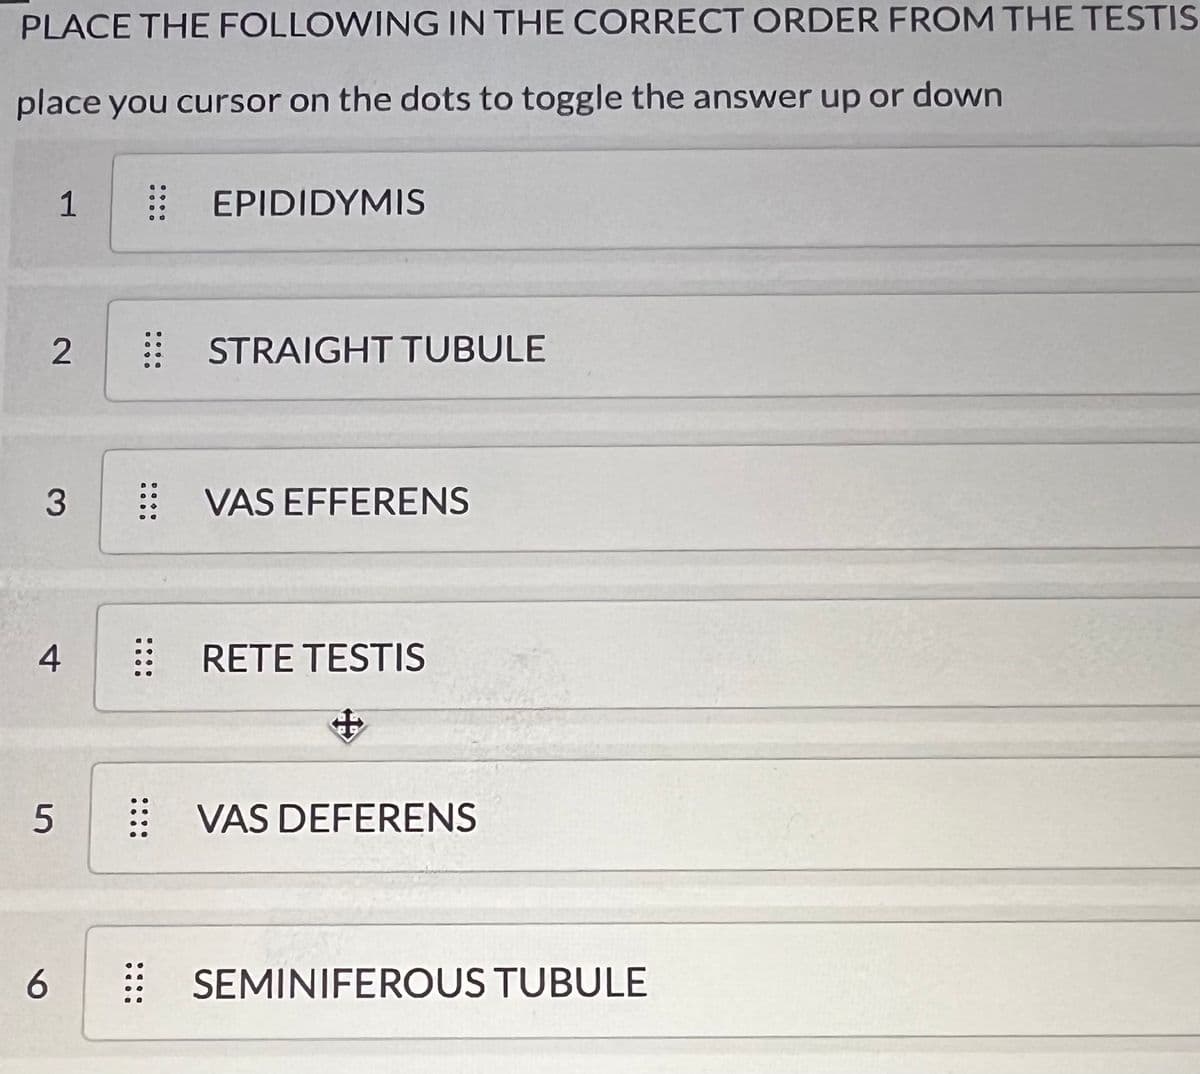 PLACE THE FOLLOWING IN THE CORRECT ORDER FROM THE TESTIS
place you cursor on the dots to toggle the answer up or down
2
1
3
4
5
6
EPIDIDYMIS
STRAIGHT TUBULE
:: VAS EFFERENS
RETE TESTIS
VAS DEFERENS
⠀⠀ SEMINIFEROUS TUBULE